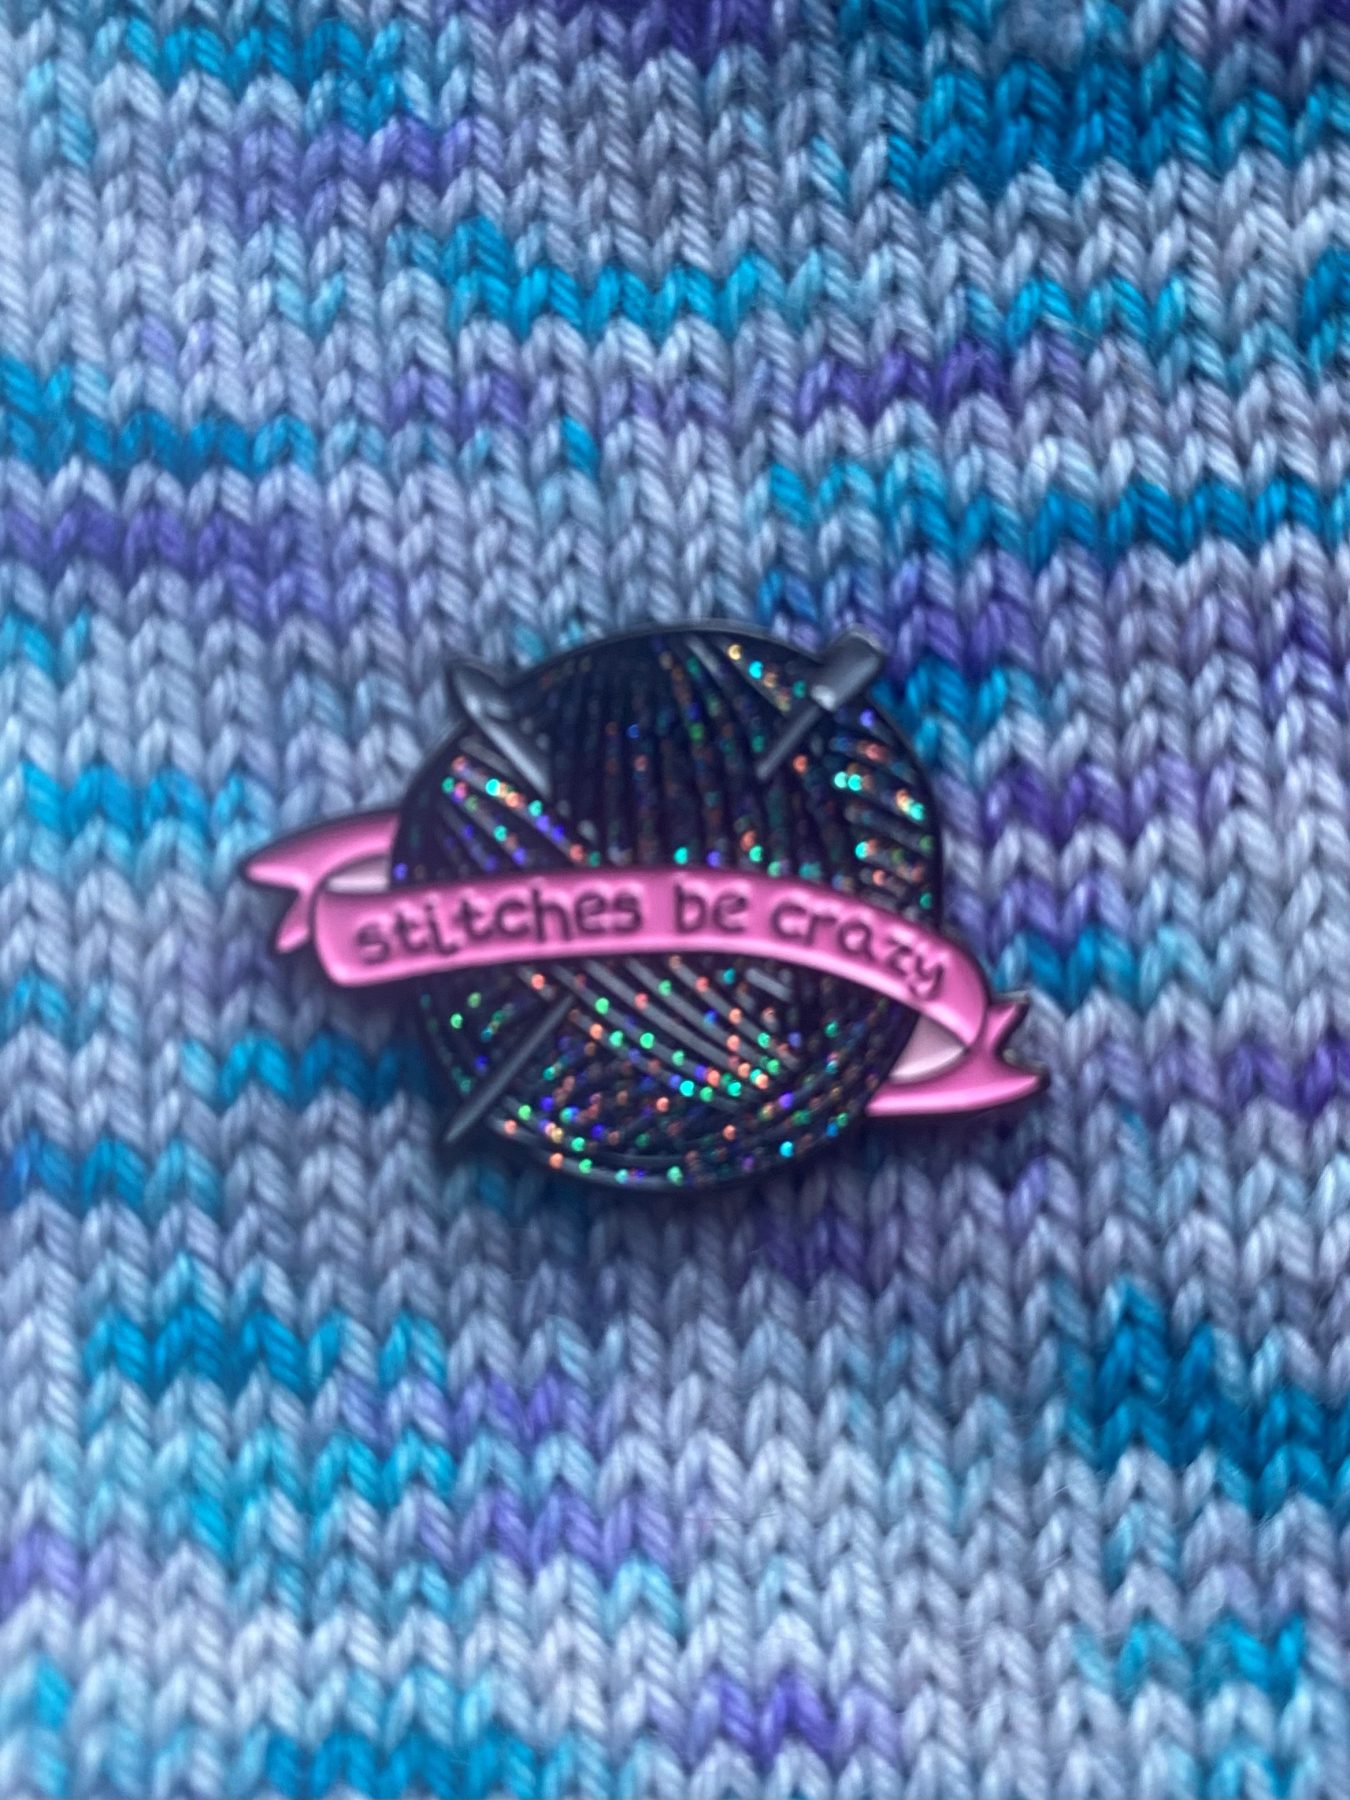 Stitches Be Crazy Pin Badge